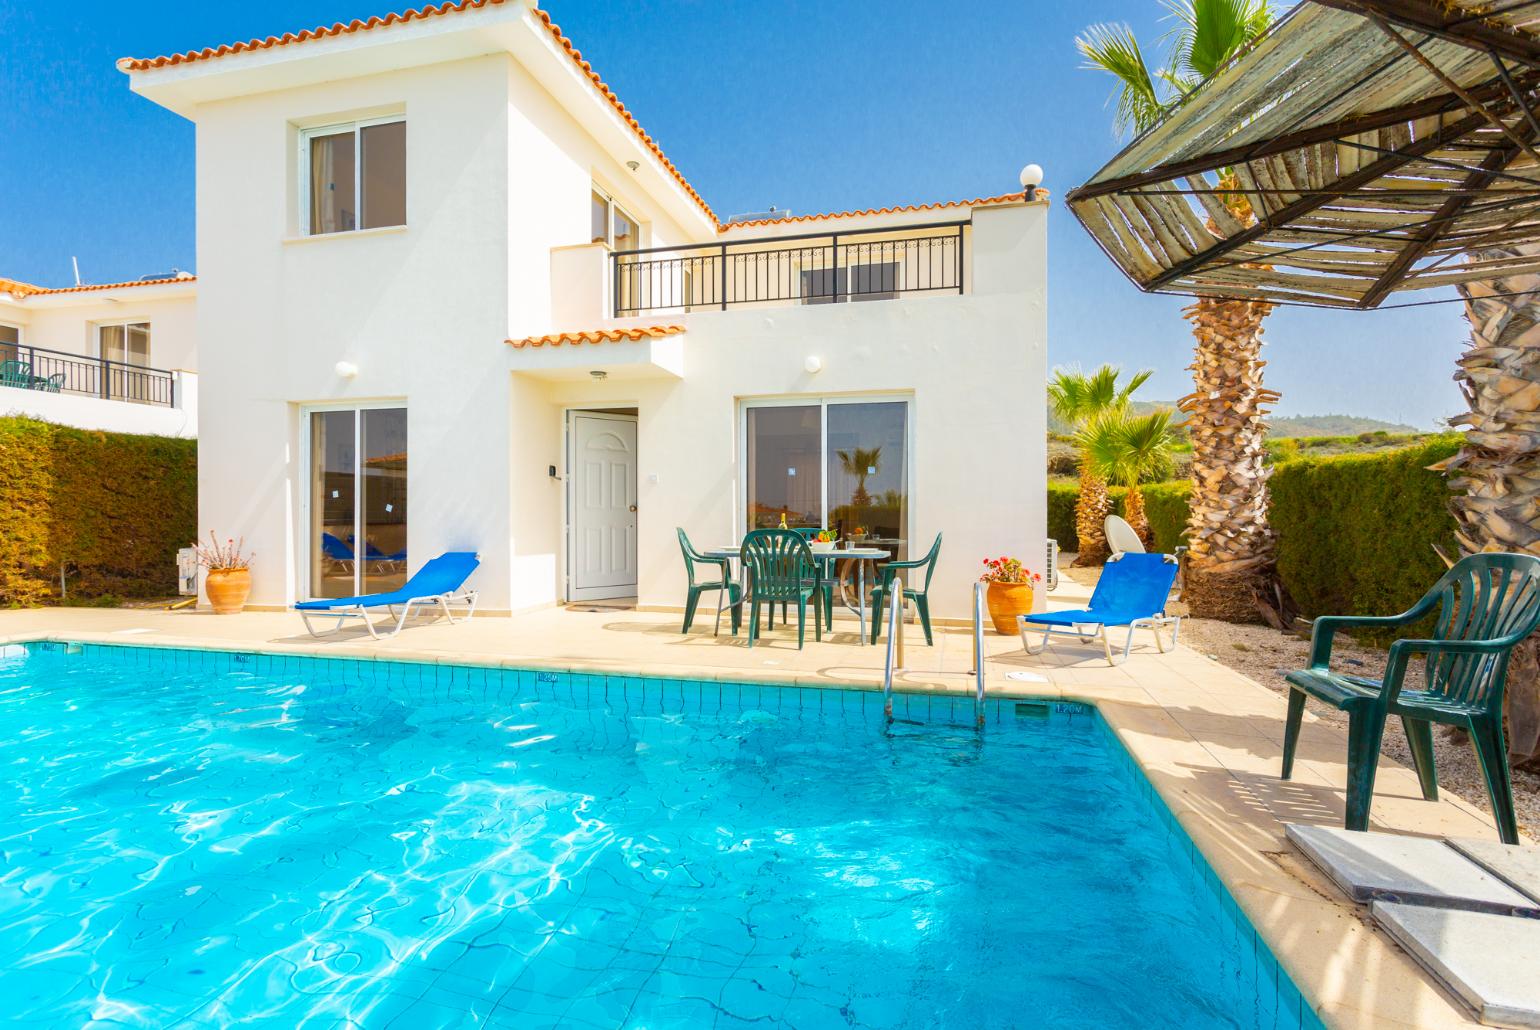 Beautiful villa with private pool and terrace with sea views